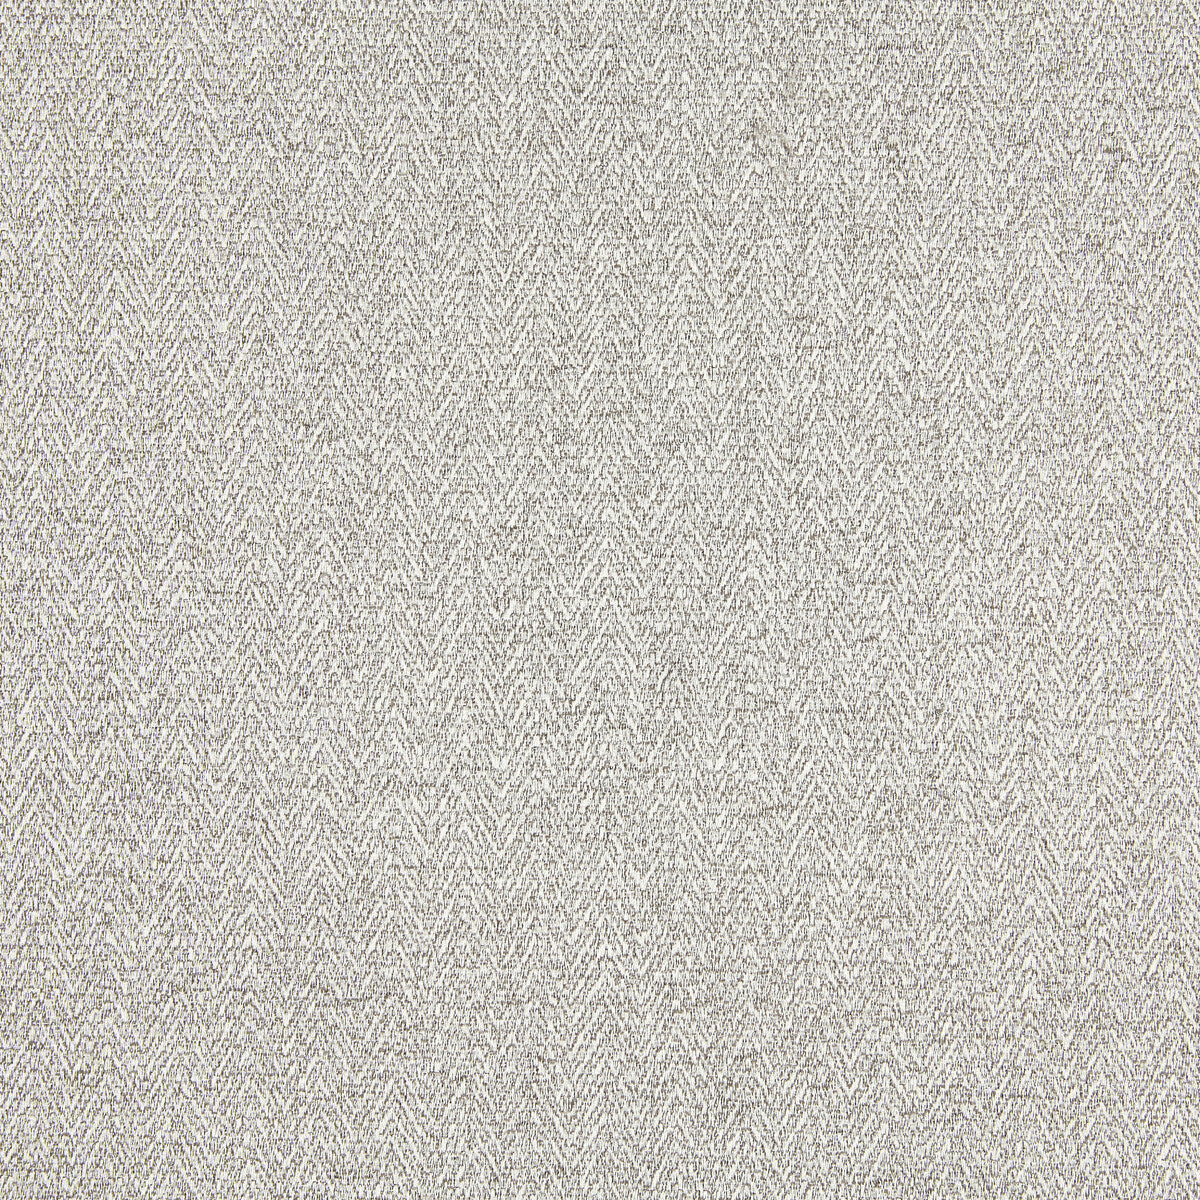 Brummell fabric in 7 color - pattern LZ-30363.07.0 - by Kravet Design in the Lizzo collection